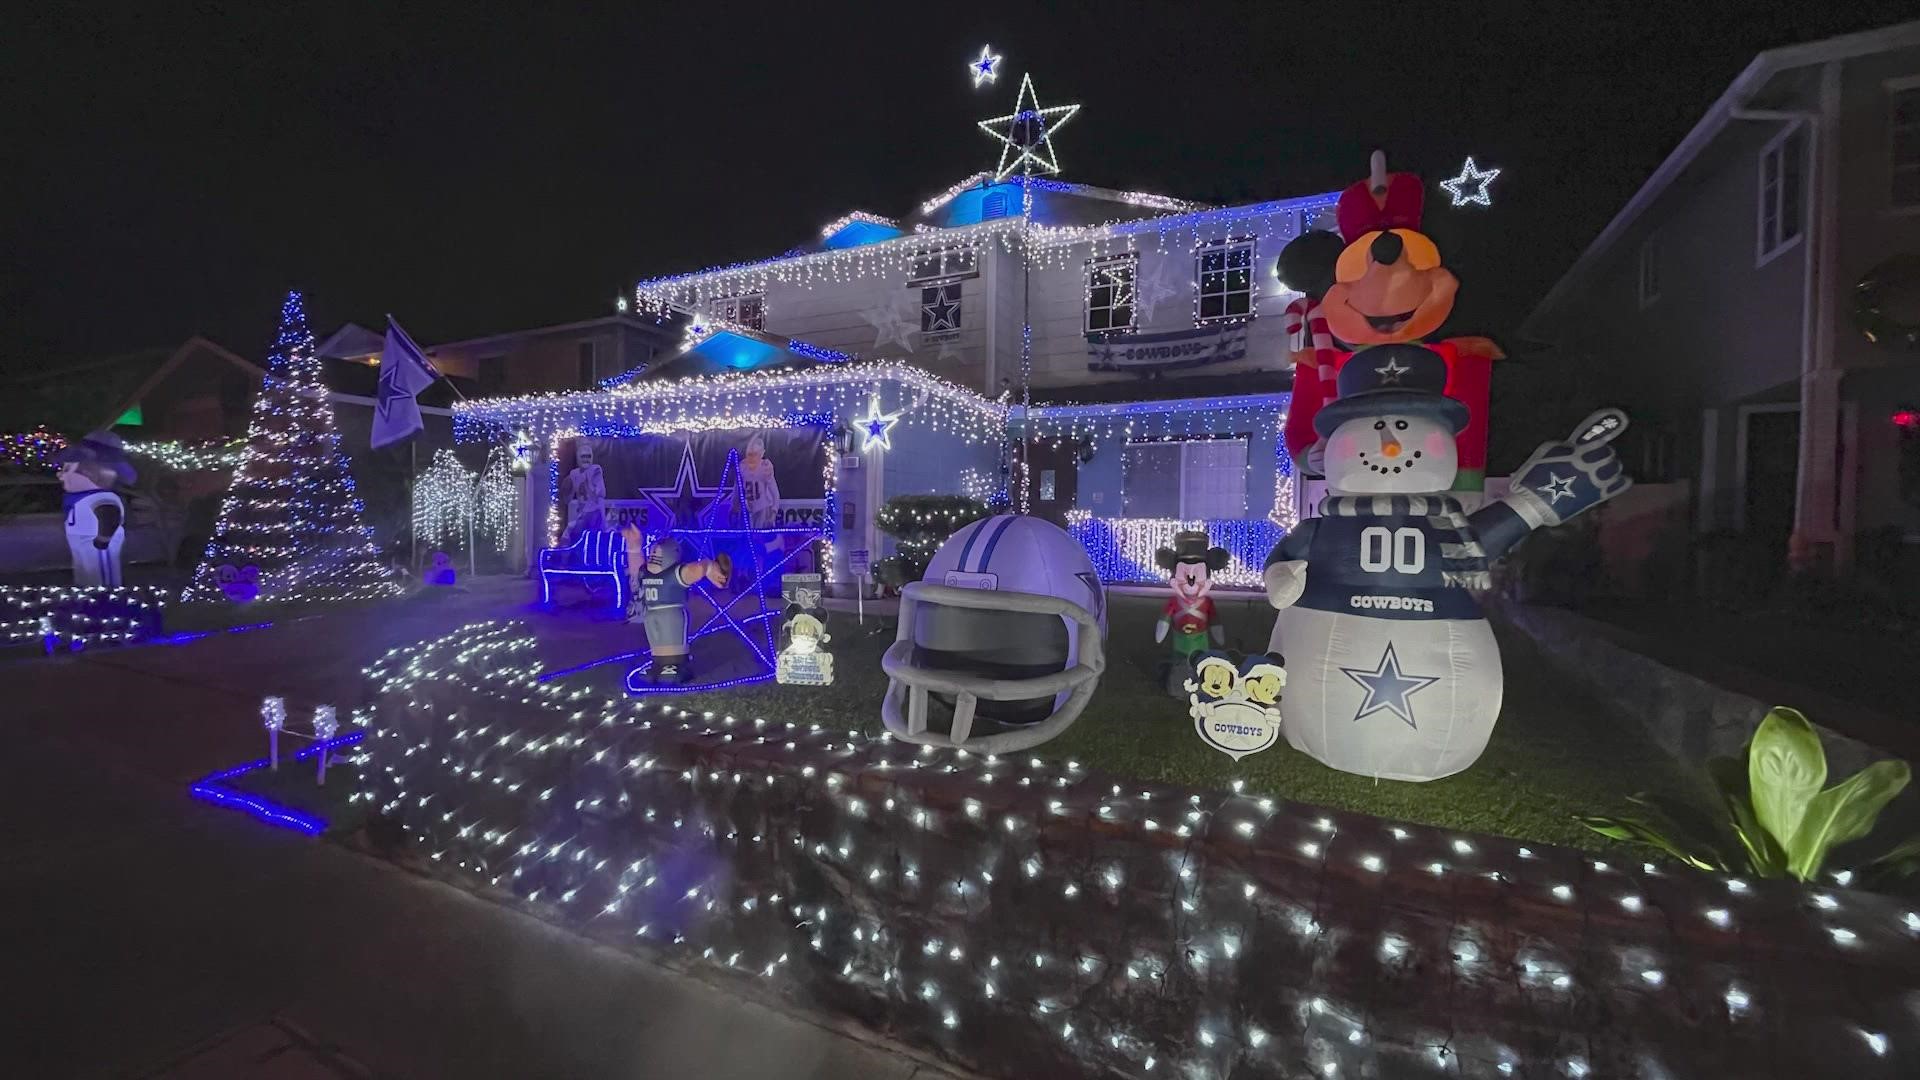 The Ahias started covering their home in Cowboys decorations for Christmas last year. Fans on Oahu Island have filled their street for pictures all December.